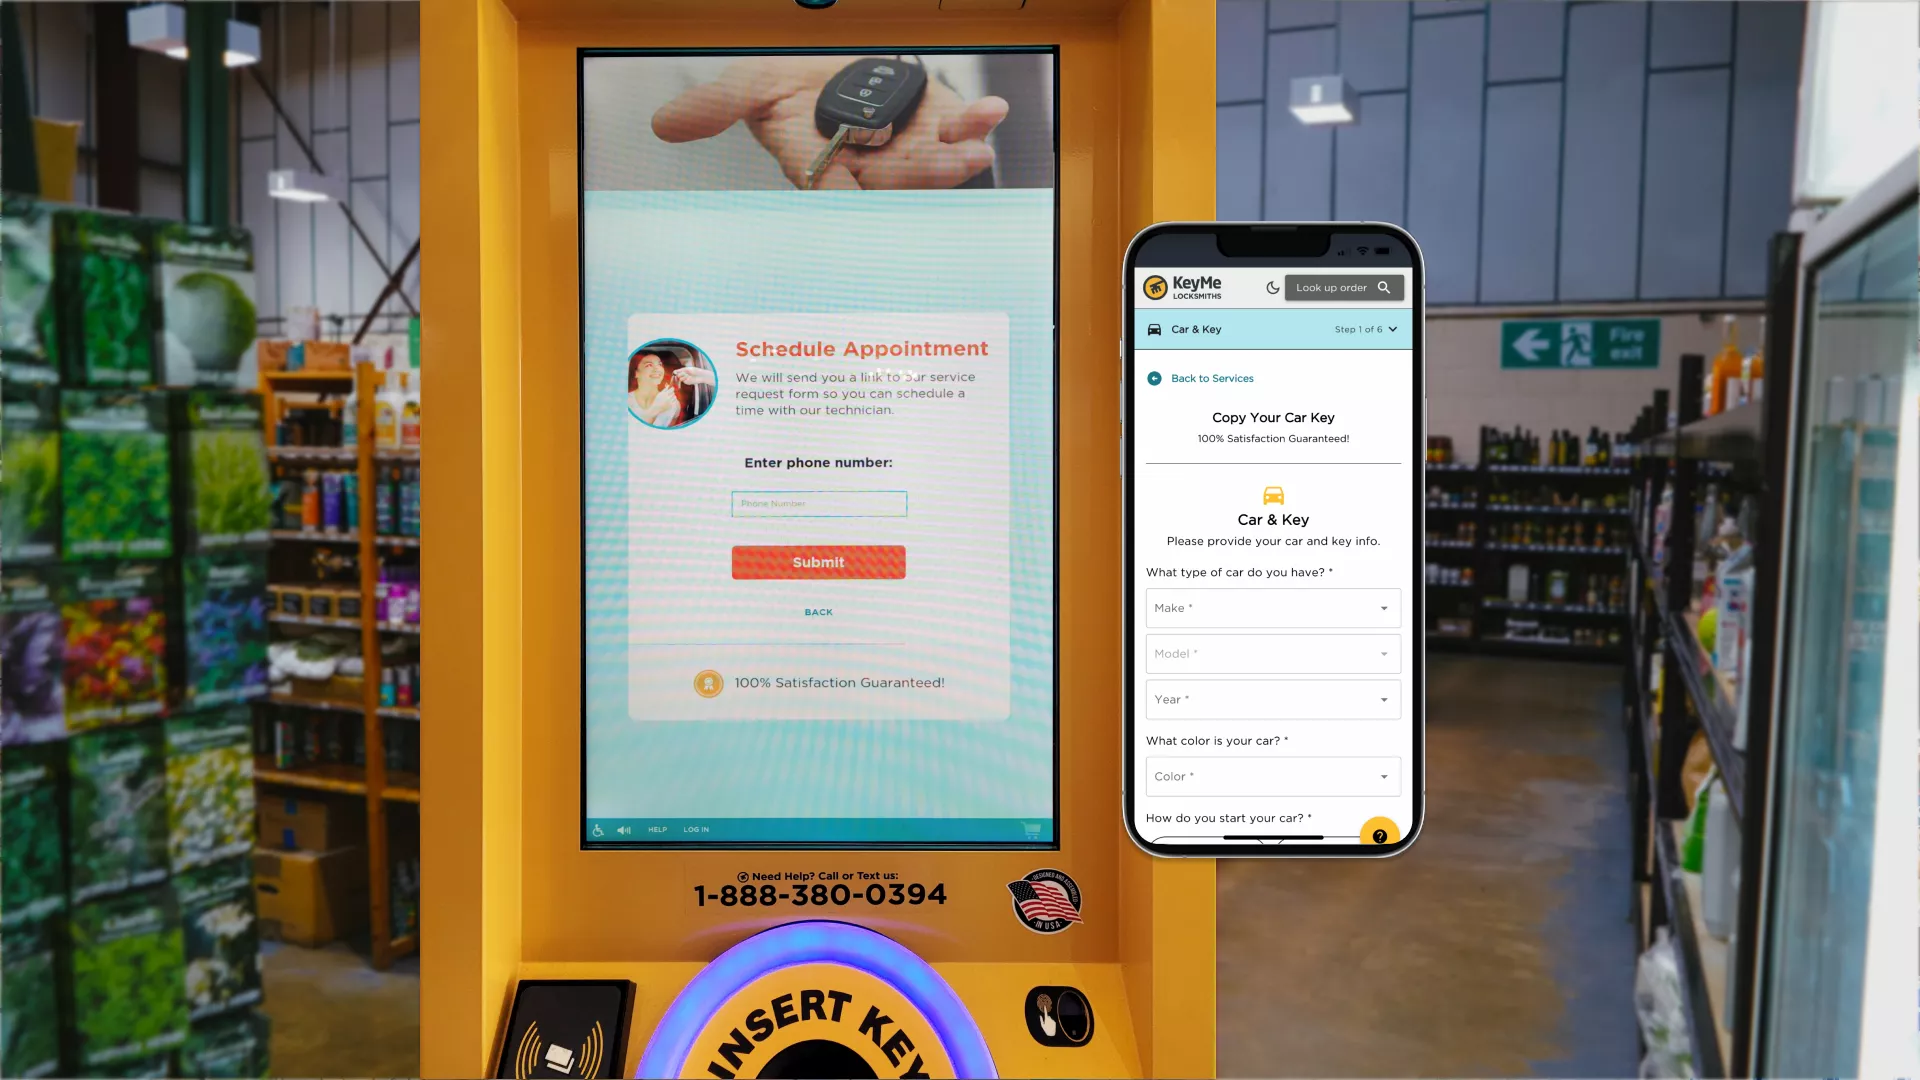 KeyMe kiosk with an input field for phone number and mobile device with a locksmith service request web form. The kiosk says it will text the link to the web form to you so you can get a locksmith to duplicate your vehicle key.